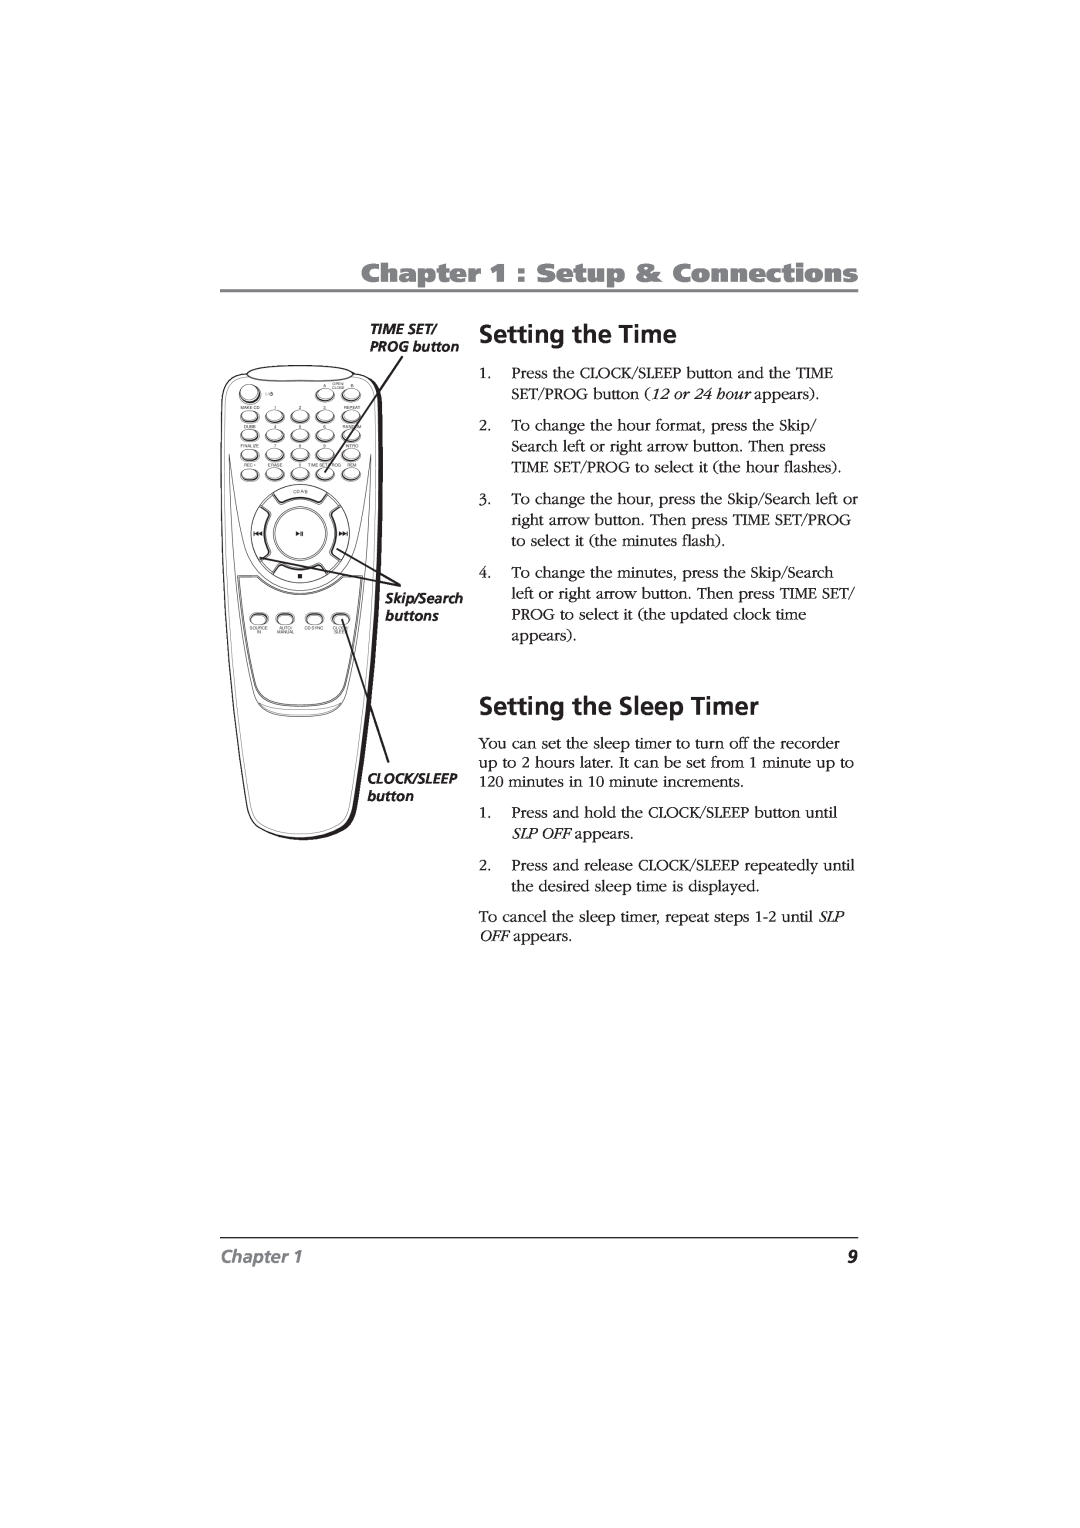 RCA CDRW120 manual Setting the Time, Setting the Sleep Timer, Setup & Connections, Chapter, TIME SET PROG button 